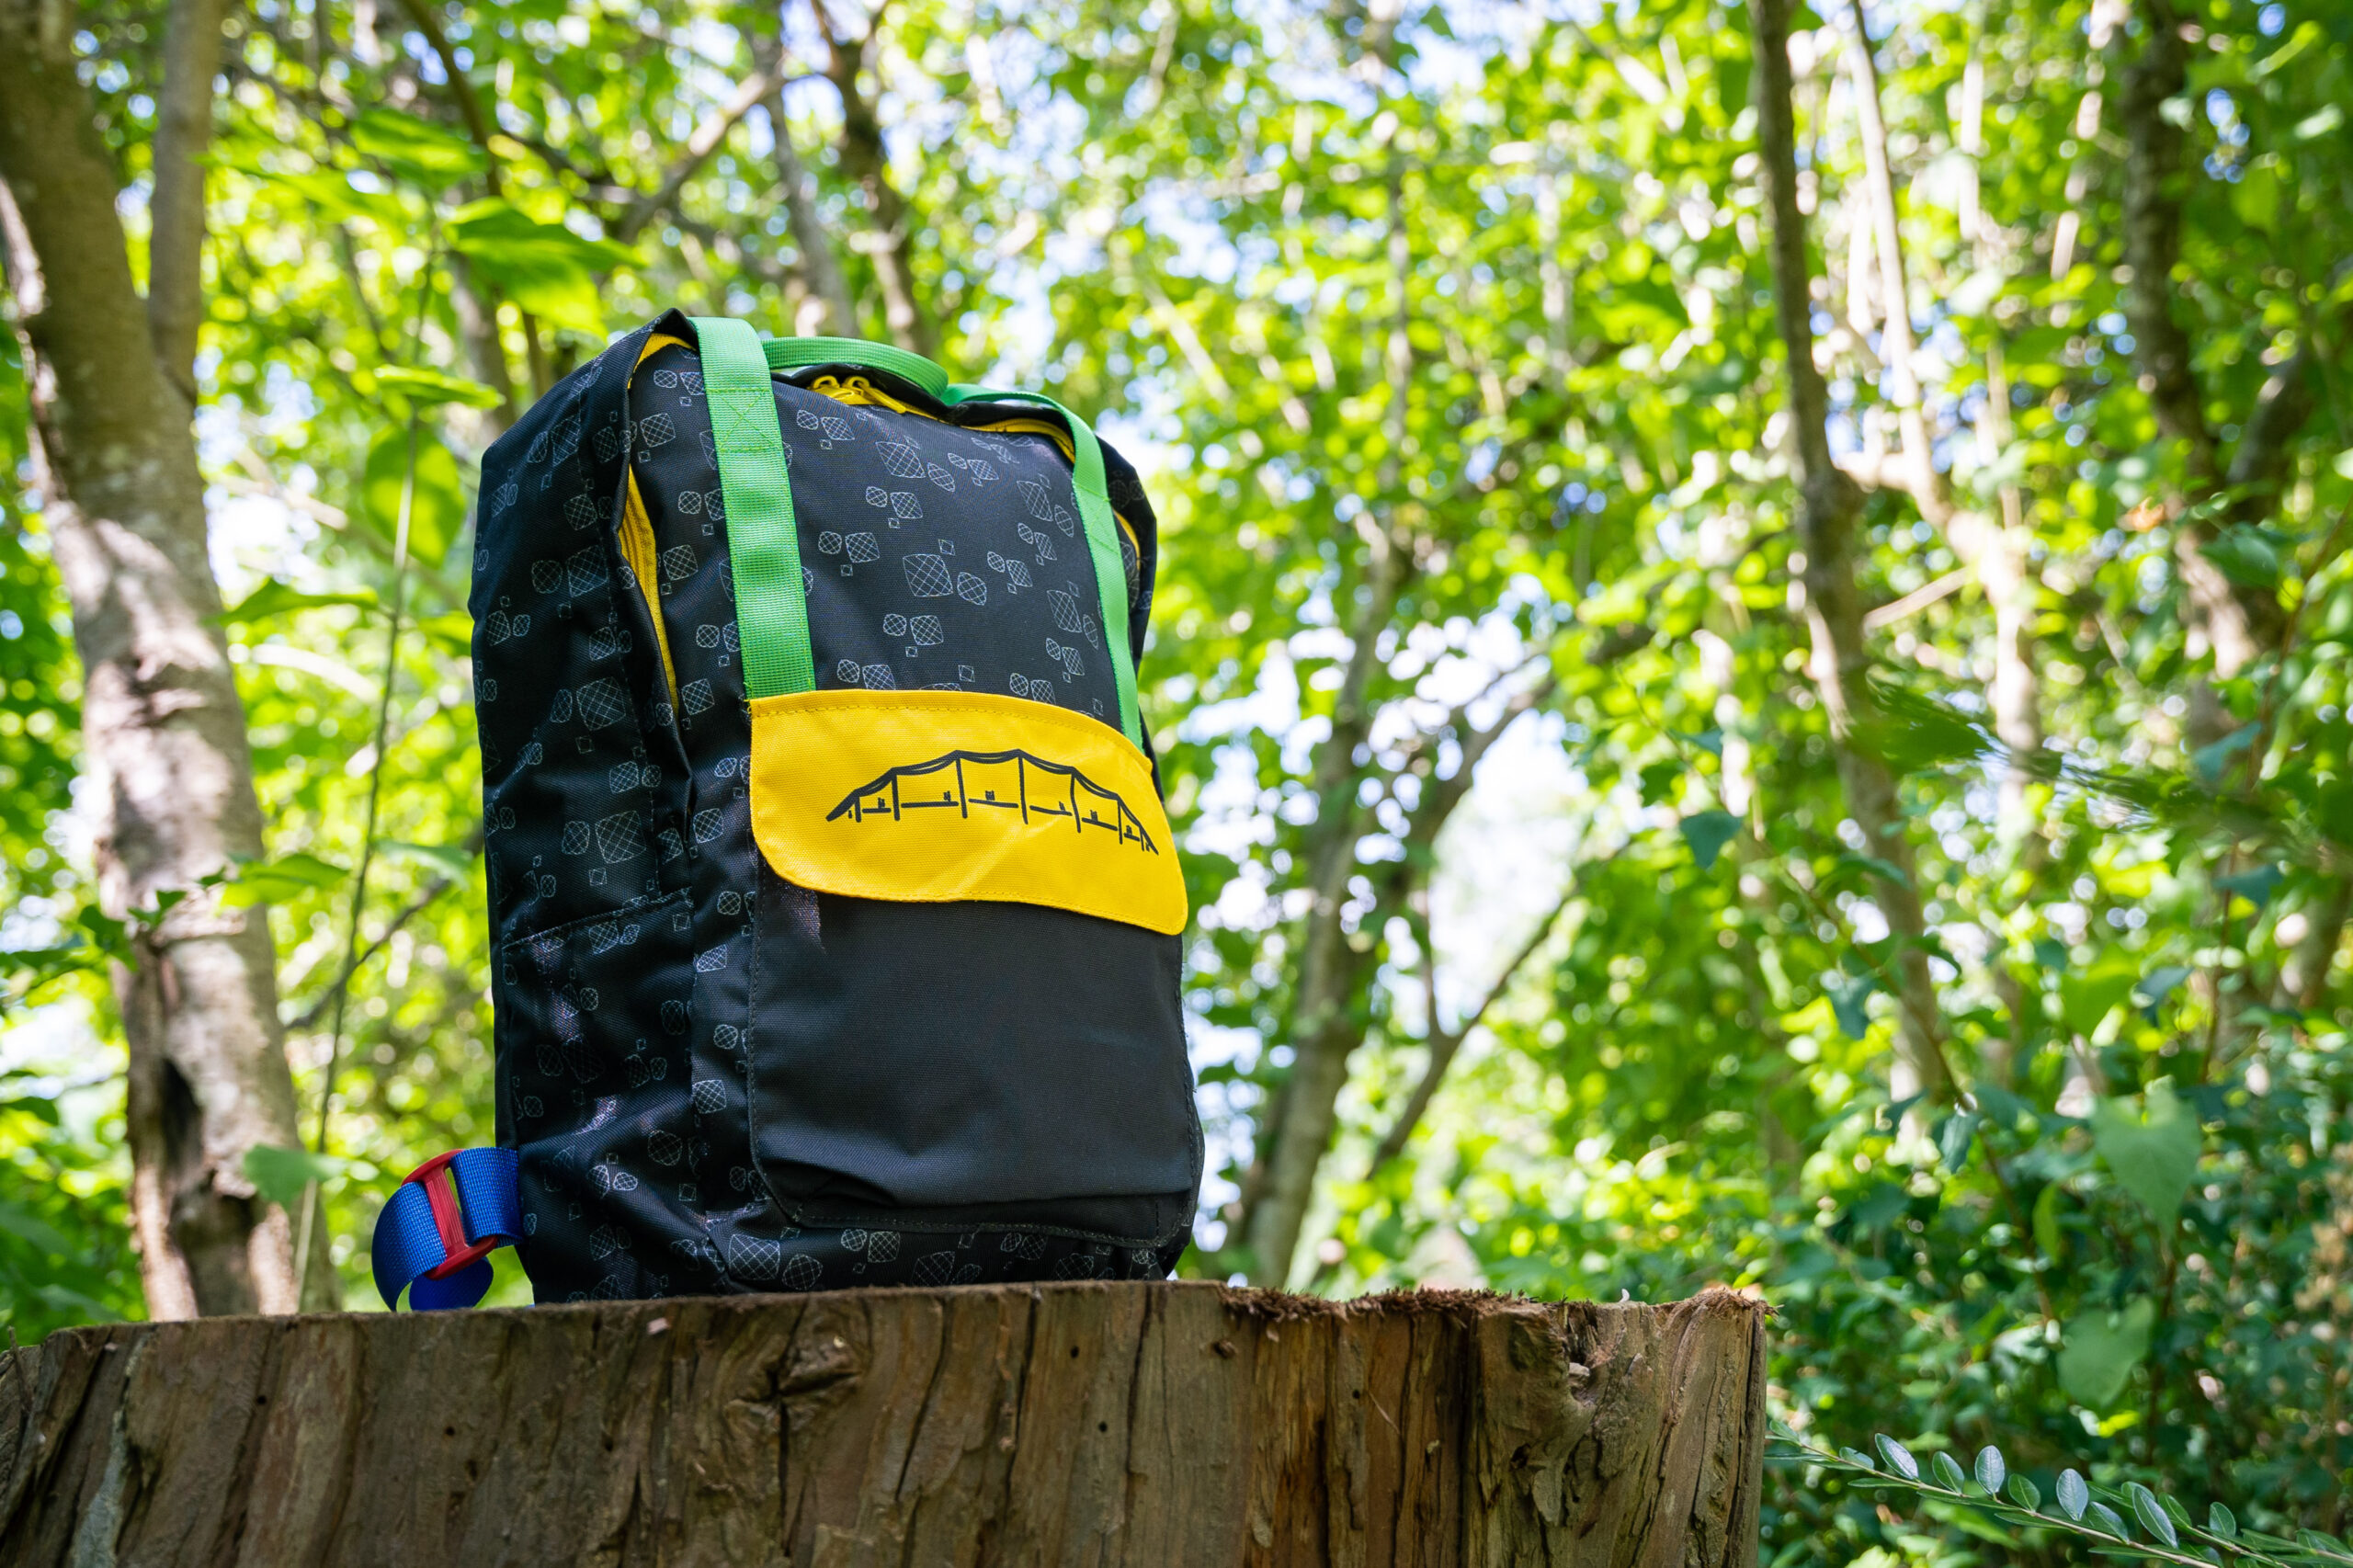 custom backpack sitting on a stump with a forest background.